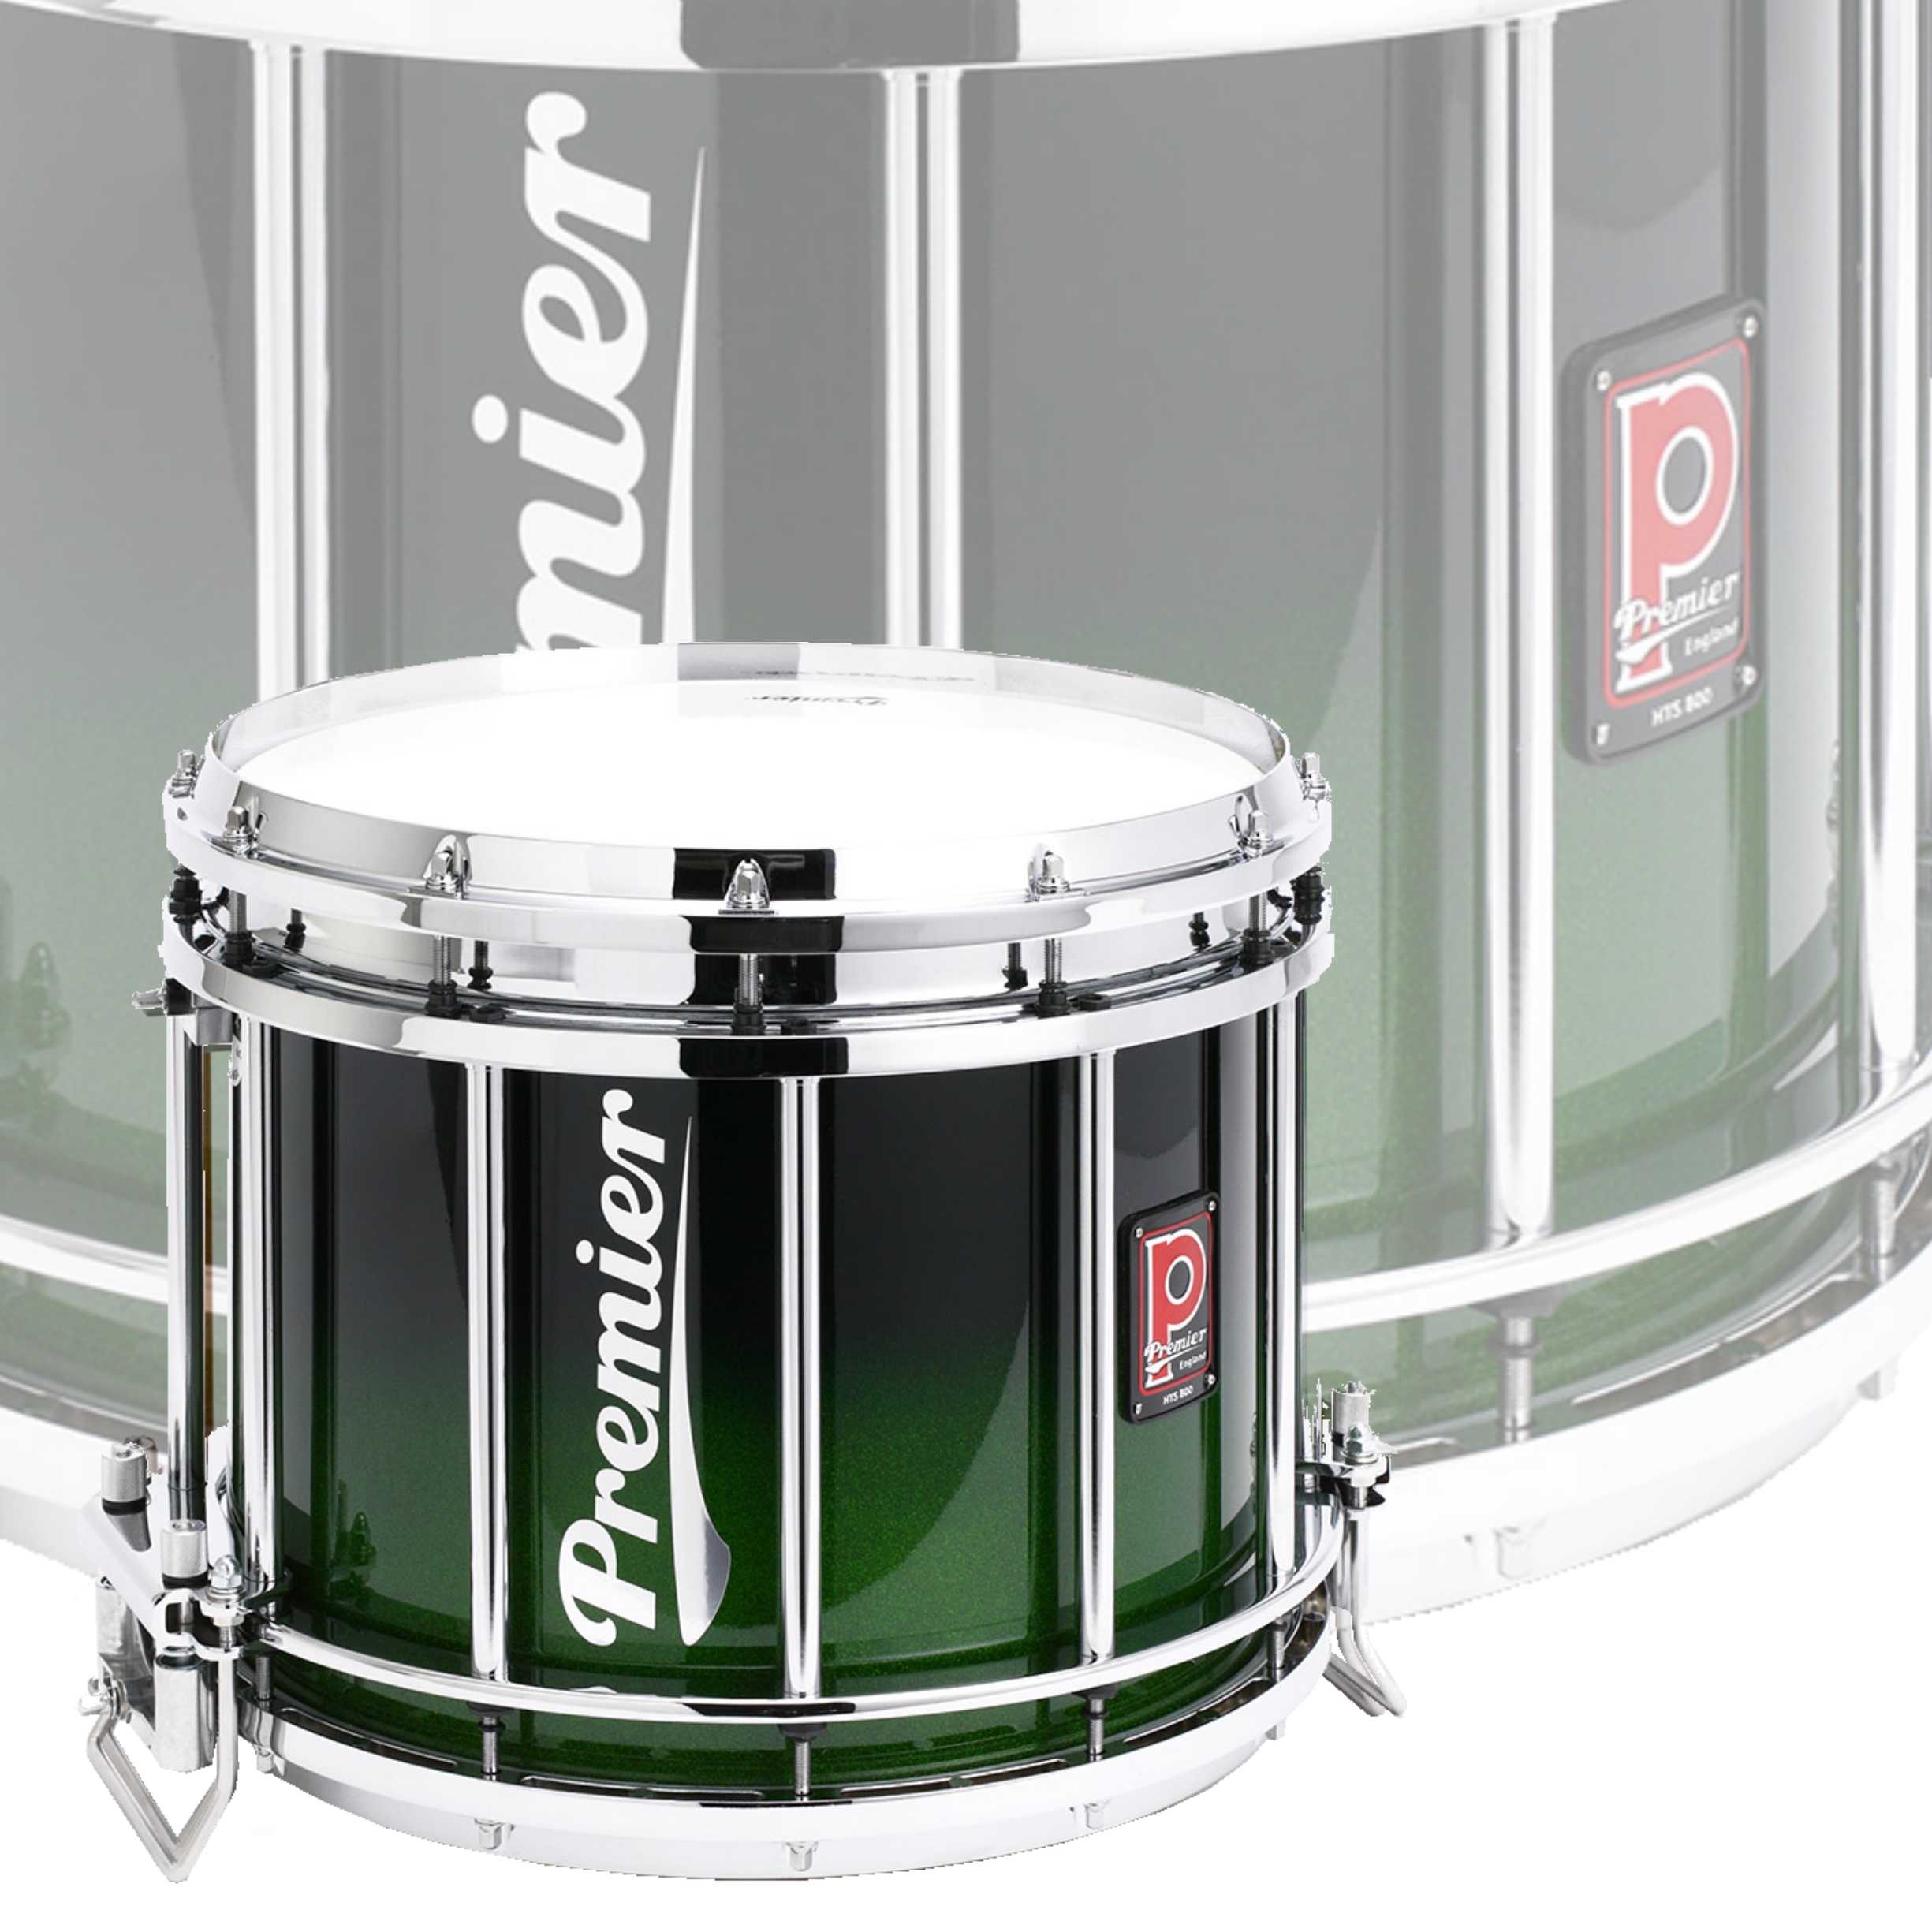 Premier Pipe Band HTS-0800SPX-C 14"x12" Side Snare Drum Emerald Sparkle Fade - Chrome